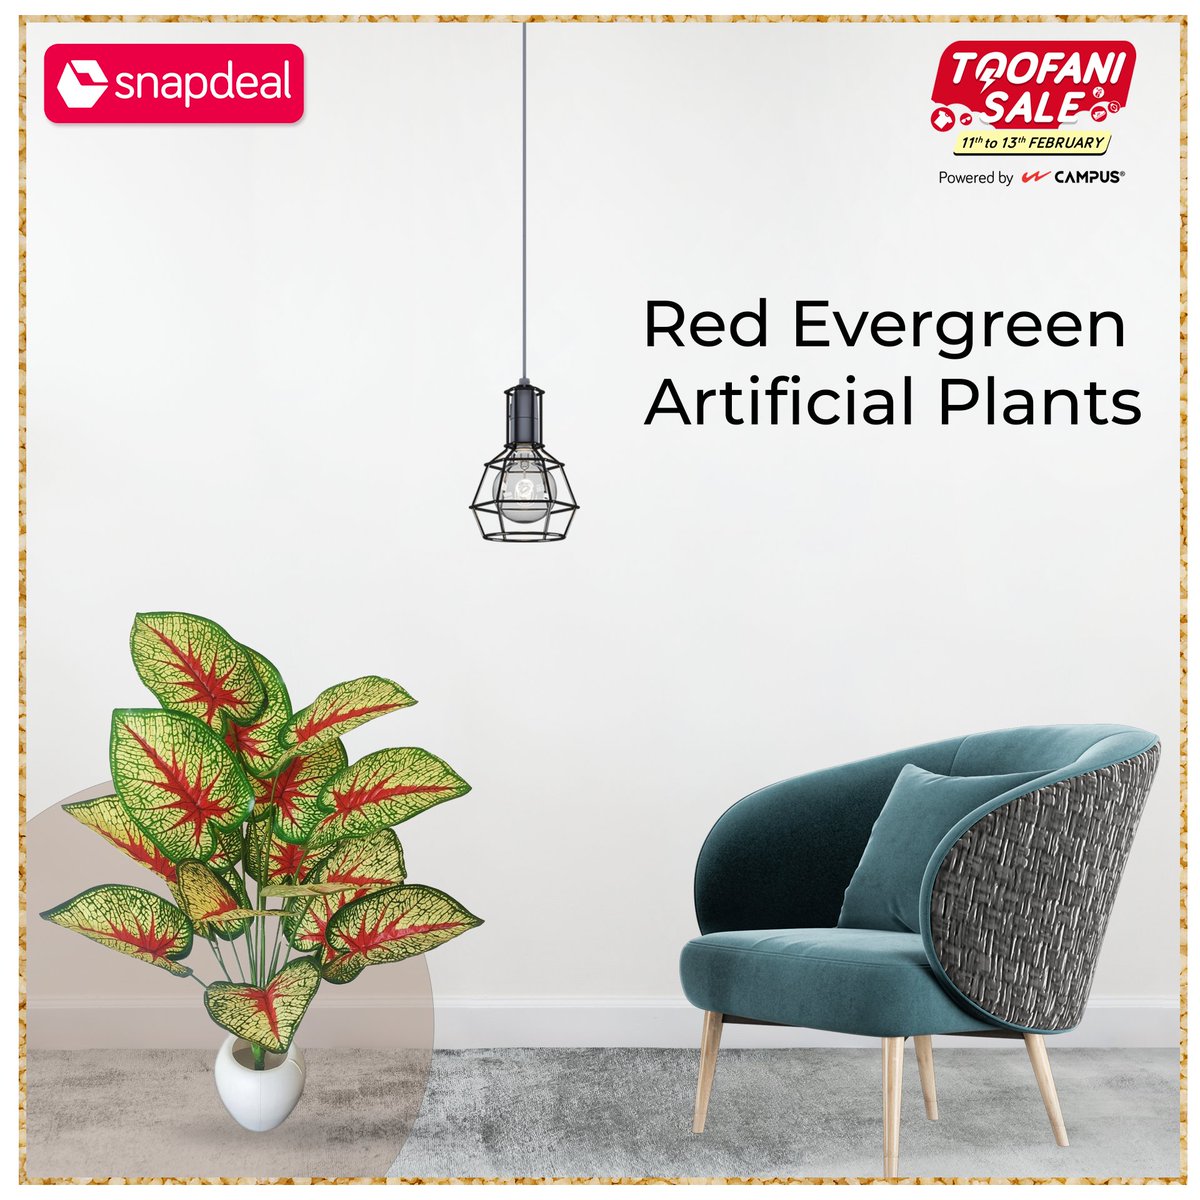 snapdeal tweet picture